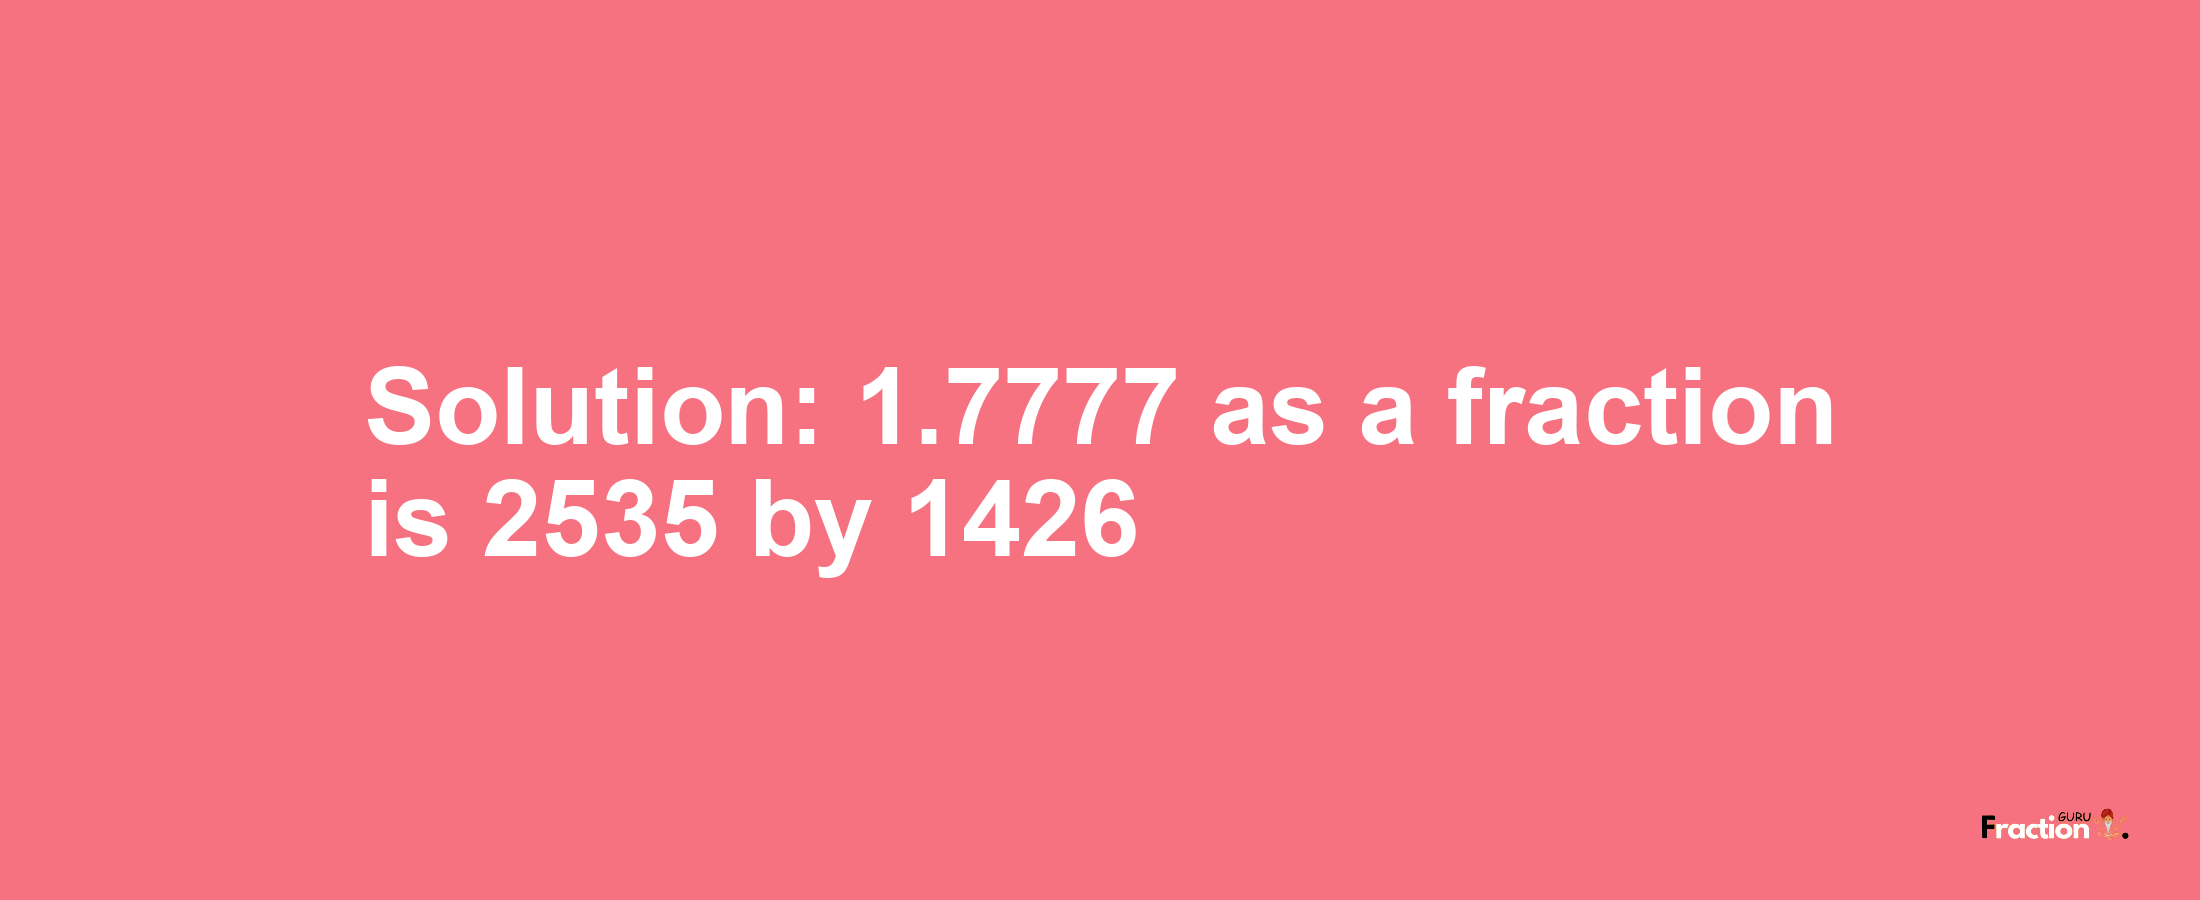 Solution:1.7777 as a fraction is 2535/1426